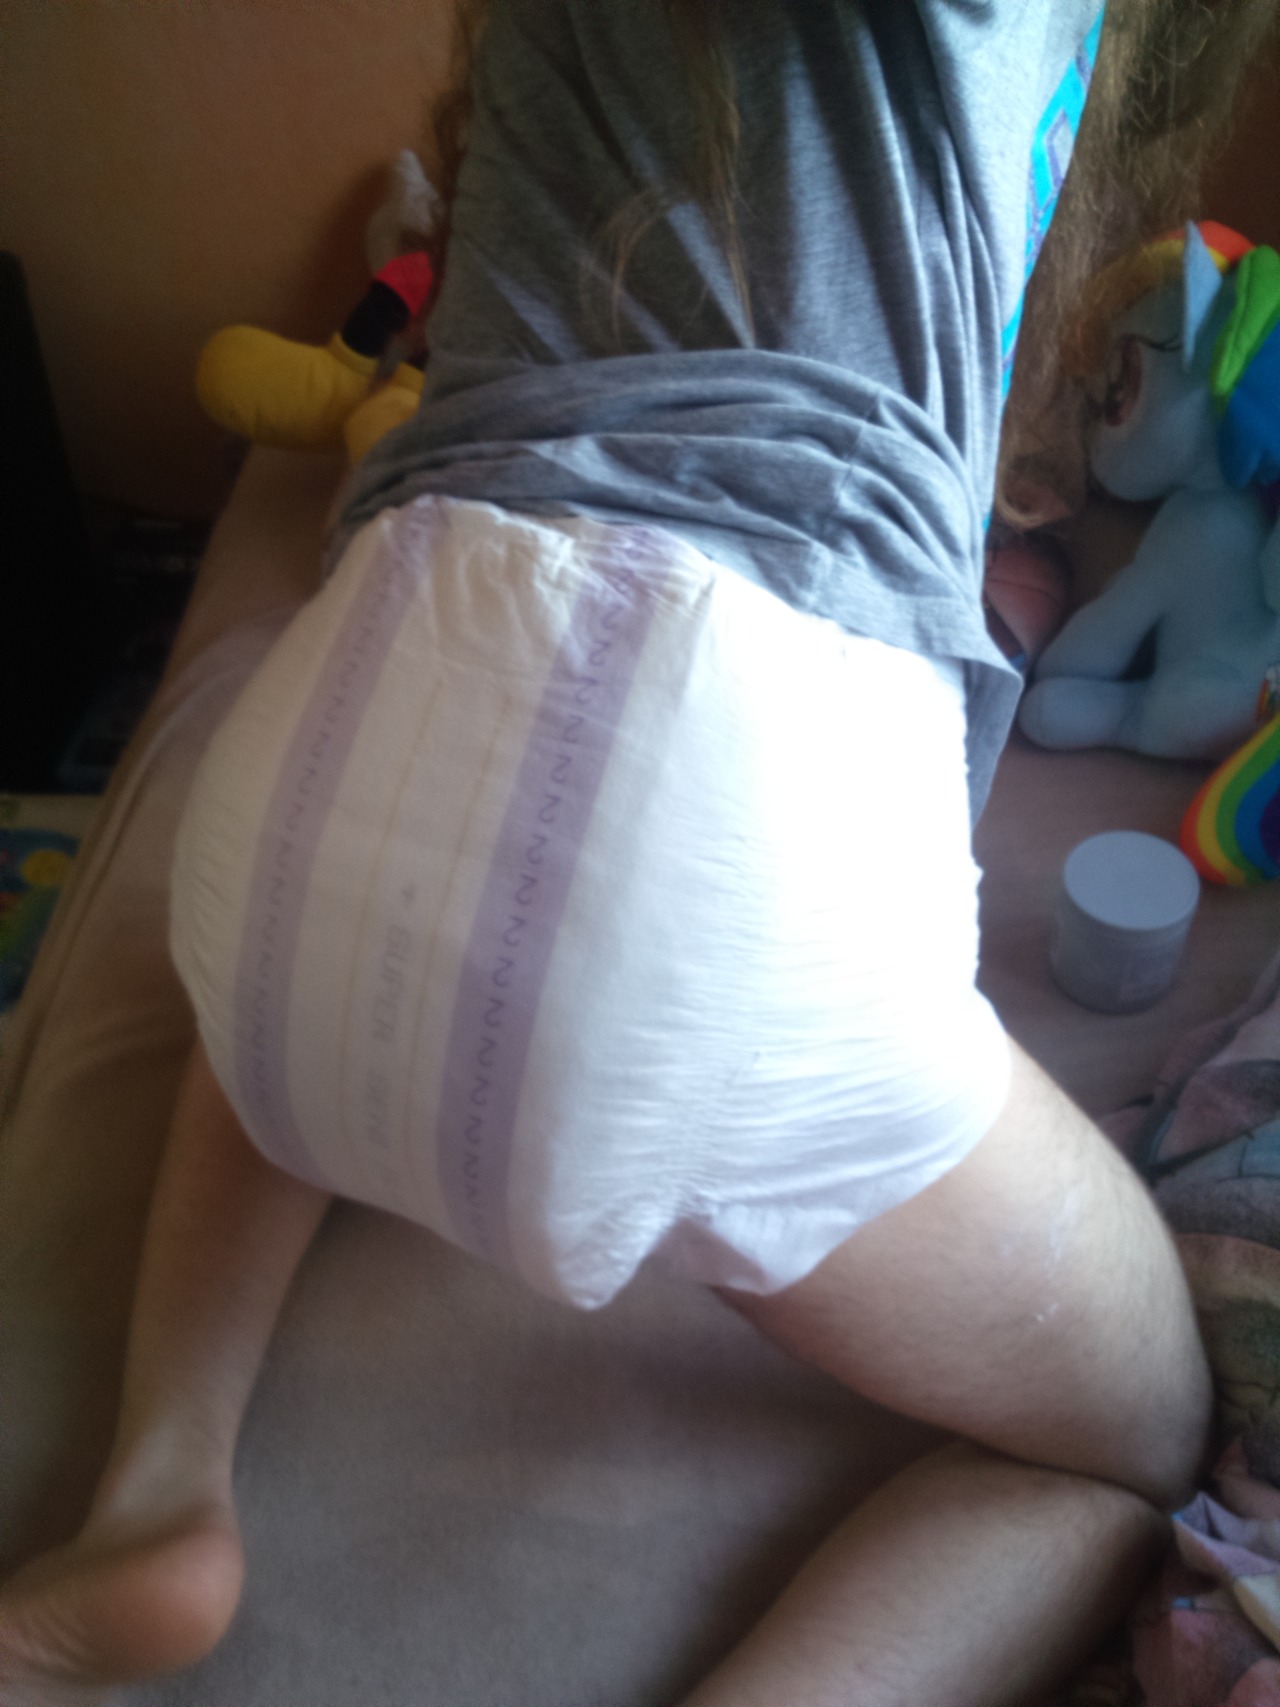 plushie-mikki:  Omg my butt needed just that today &gt;.&lt;